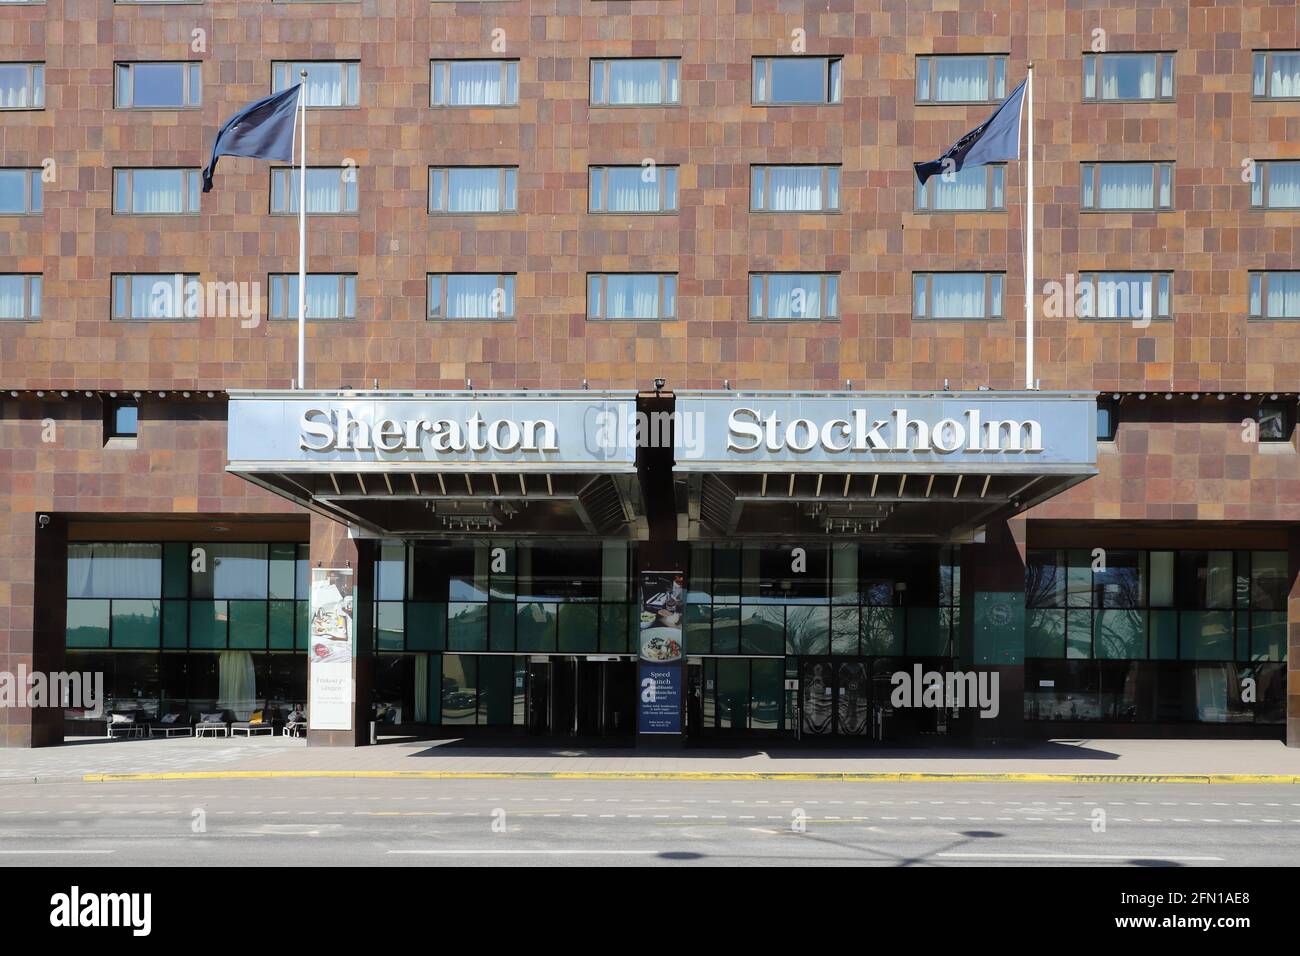 Stockholm, Sweden - May 12, 2021: Entrance and sign at the Sheraton Stockholm hotel. Stock Photo